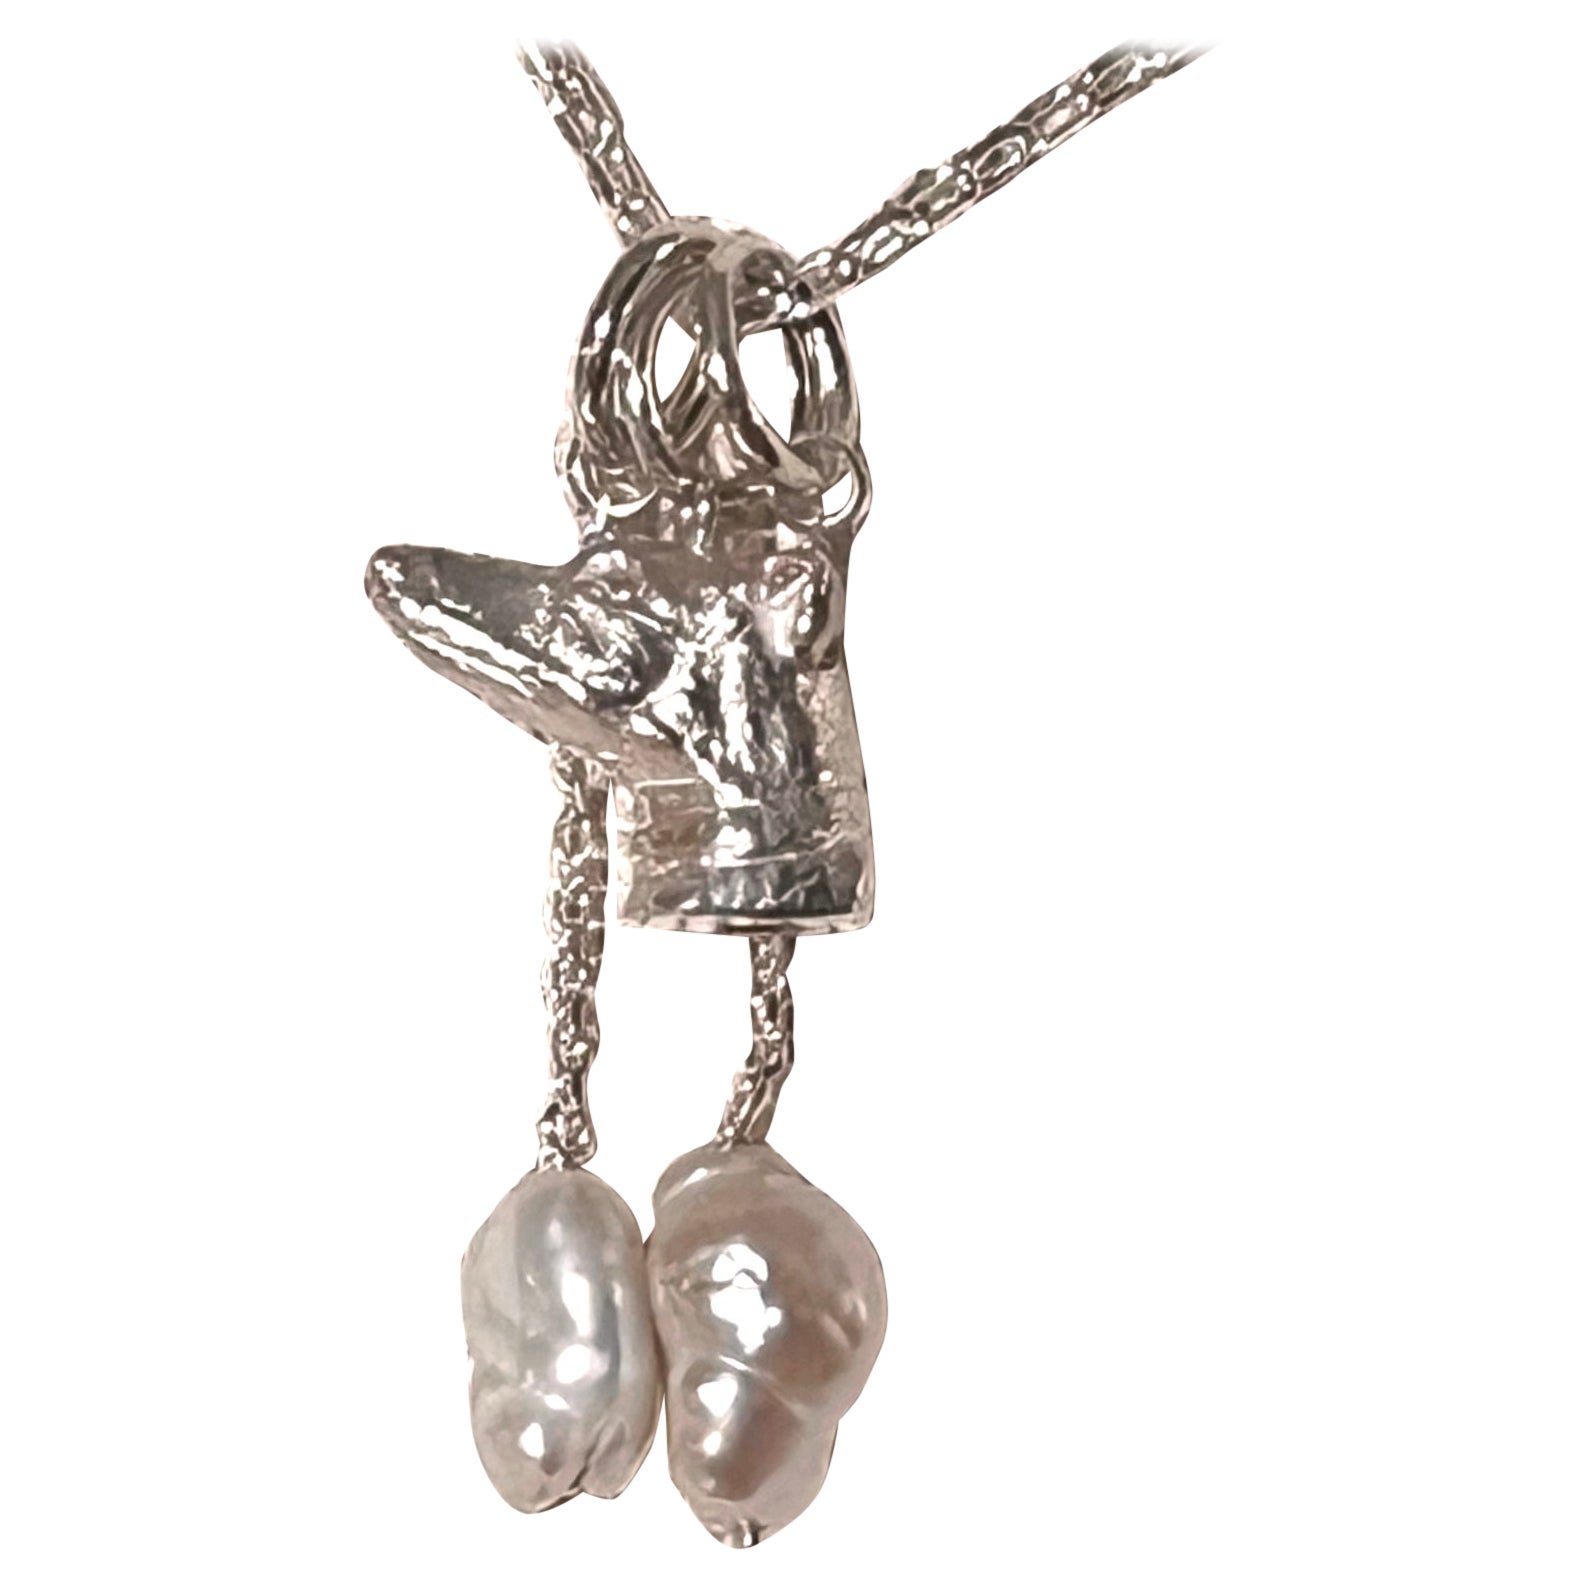 Paul Eaton Sculpted Greyhound Dog Head Pendant with One or Two Pearl Drops For Sale